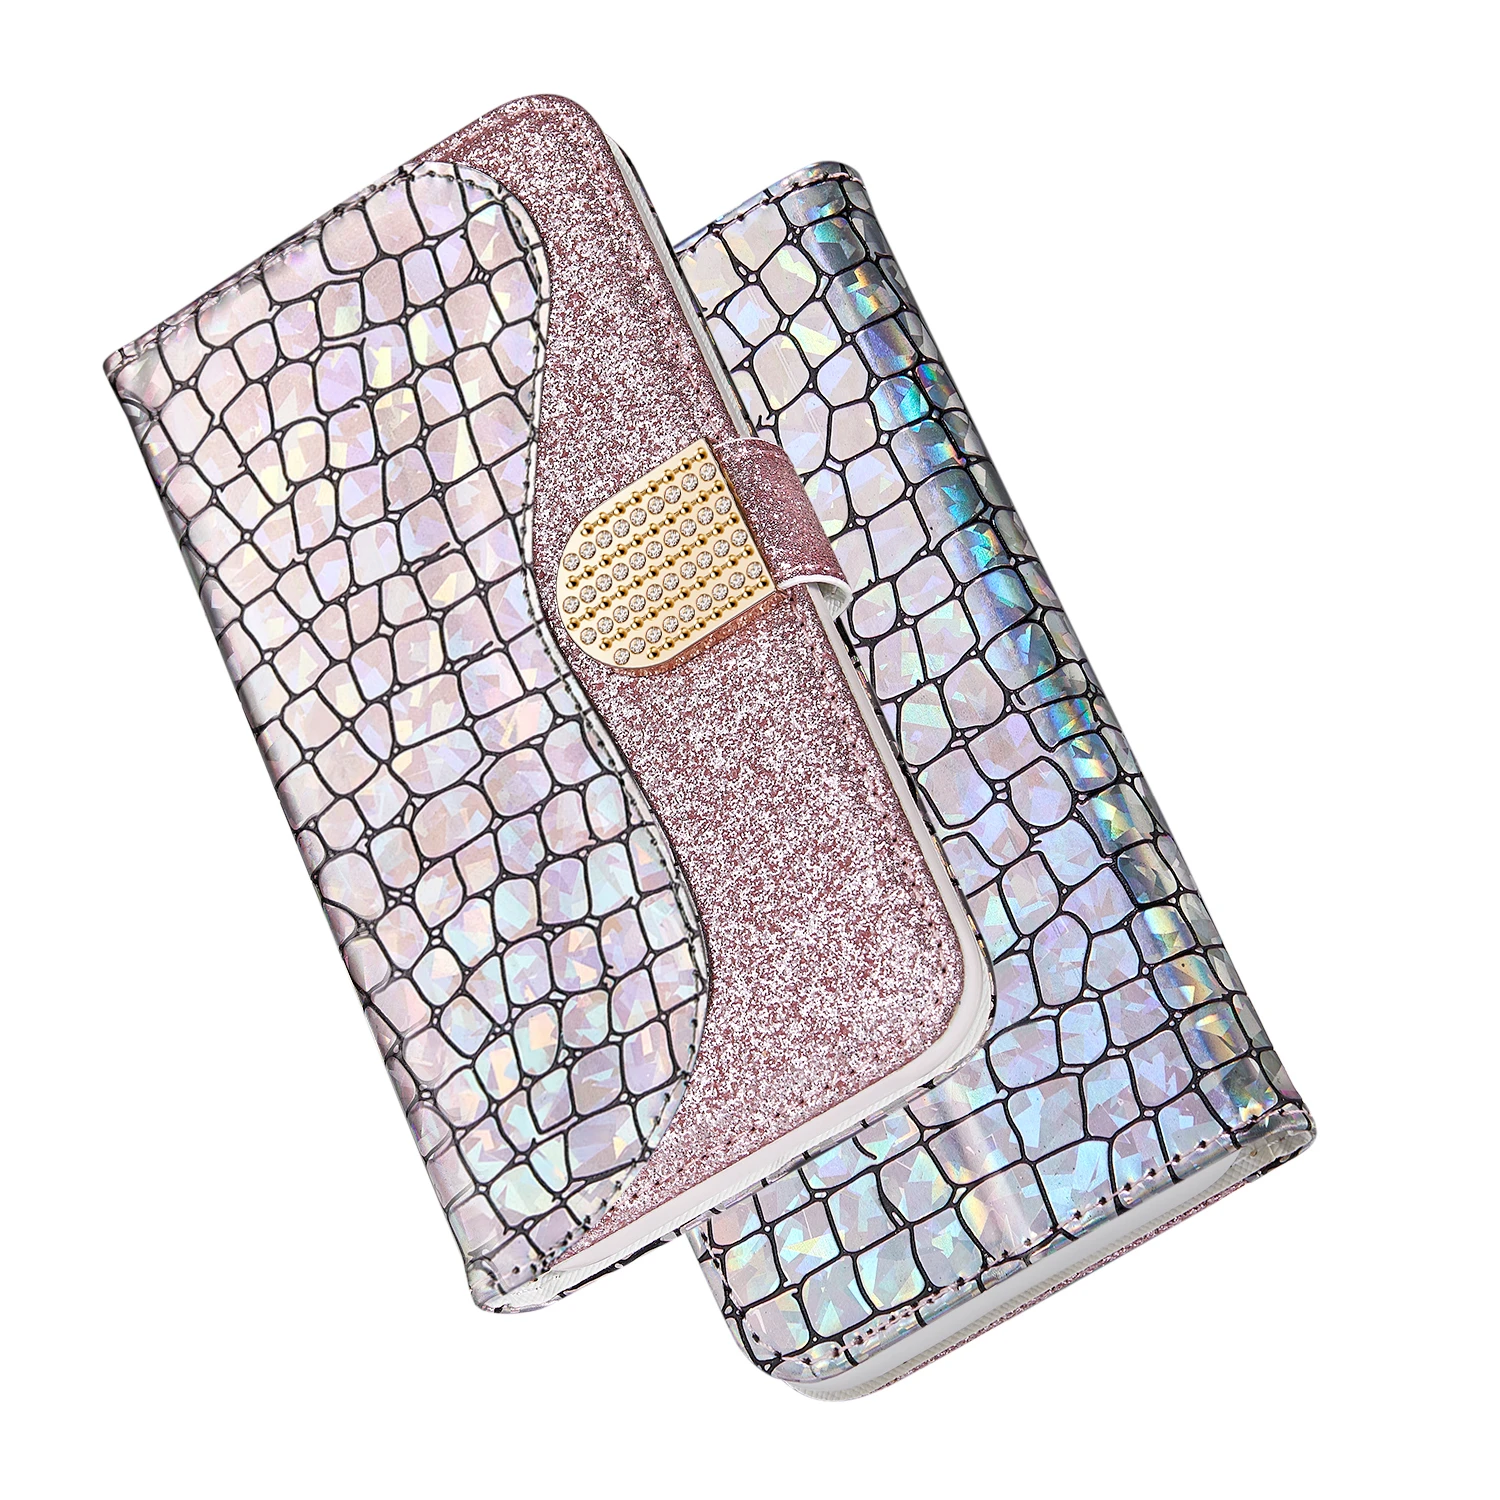 Glitter Leather Case For iPhone 11 12 13 Pro XR XS Max X 7 8 6s Plus 5s Alligator Flip Case Cover For Apple iPhone SE 2022 2020 best cases for iphone 13 pro max